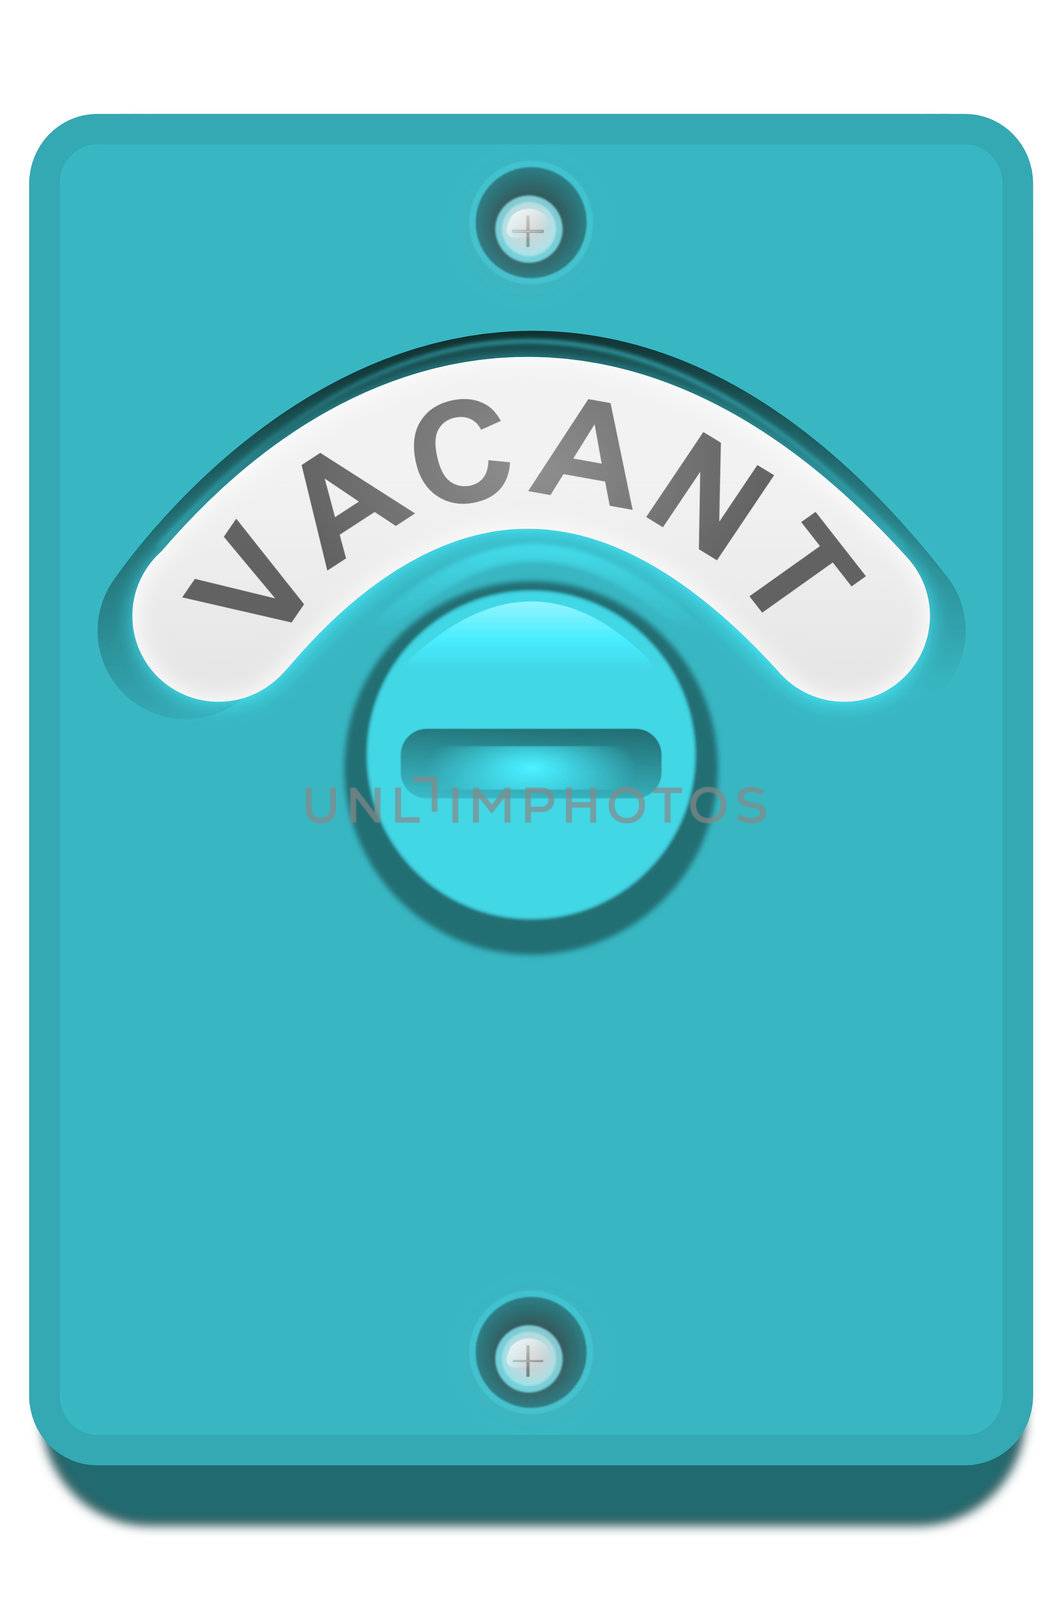 Illustration of a blue toilet door lock with the 'vacant' position showing. White background.